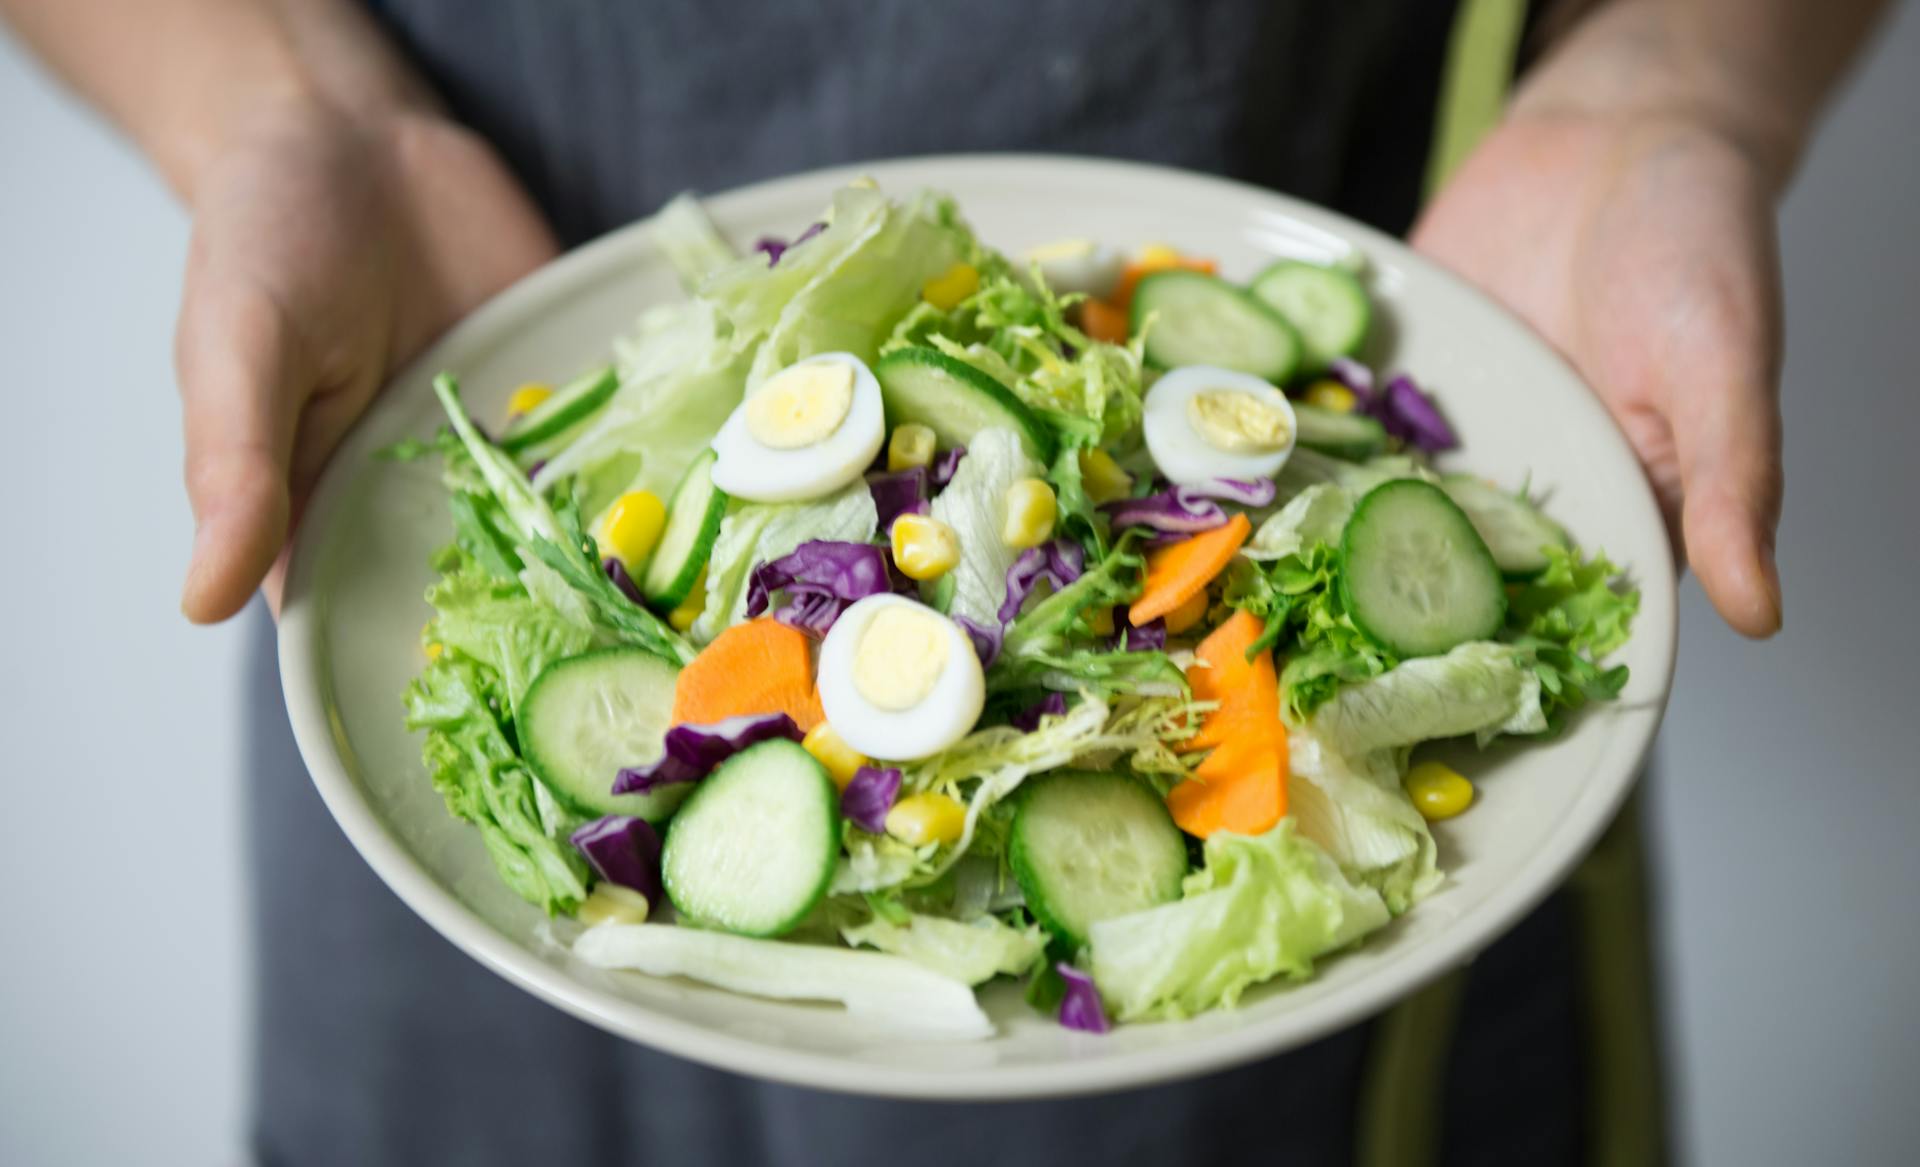 A person holding a bowl of salad | Source: Pexels